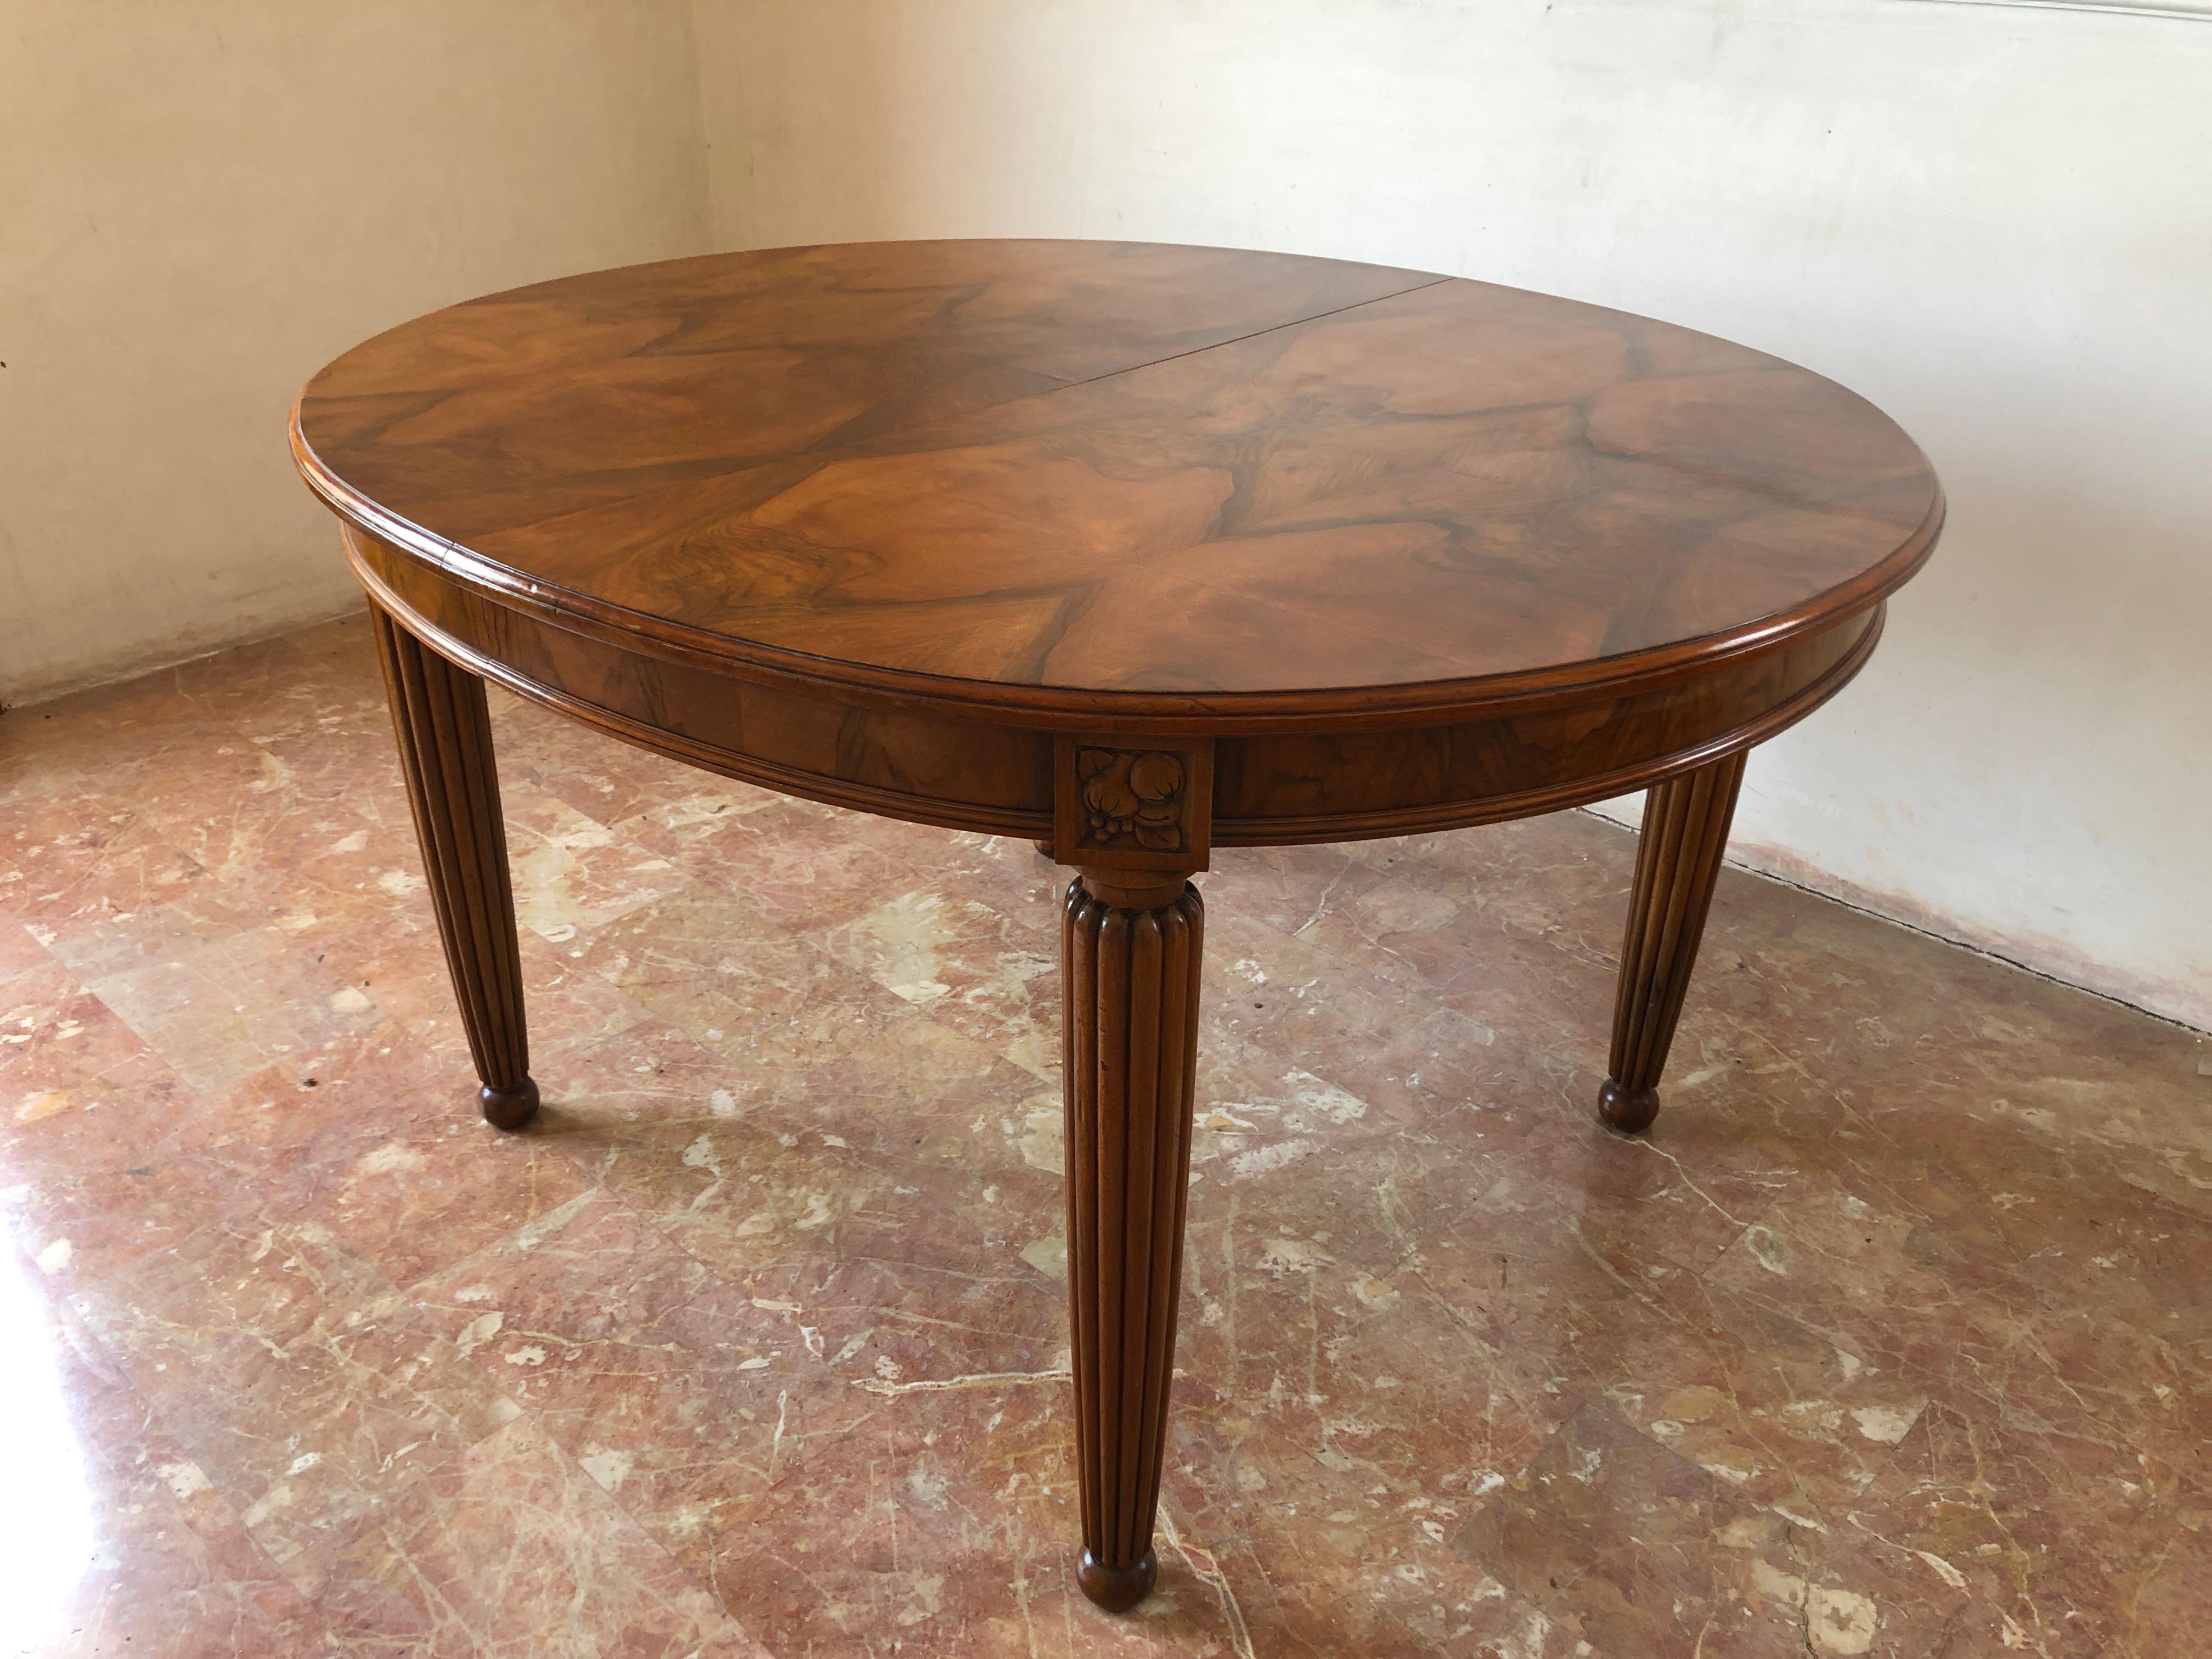 French liberty Art Nouveau dining table in a very valuable walnut feather, circa 1920.
Grooved legs with naturalistic motif, characteristic elements of the period. 
The dining table is extendible.

Measures: Normal 112 x 130 x 75cm, 44 x 51 x